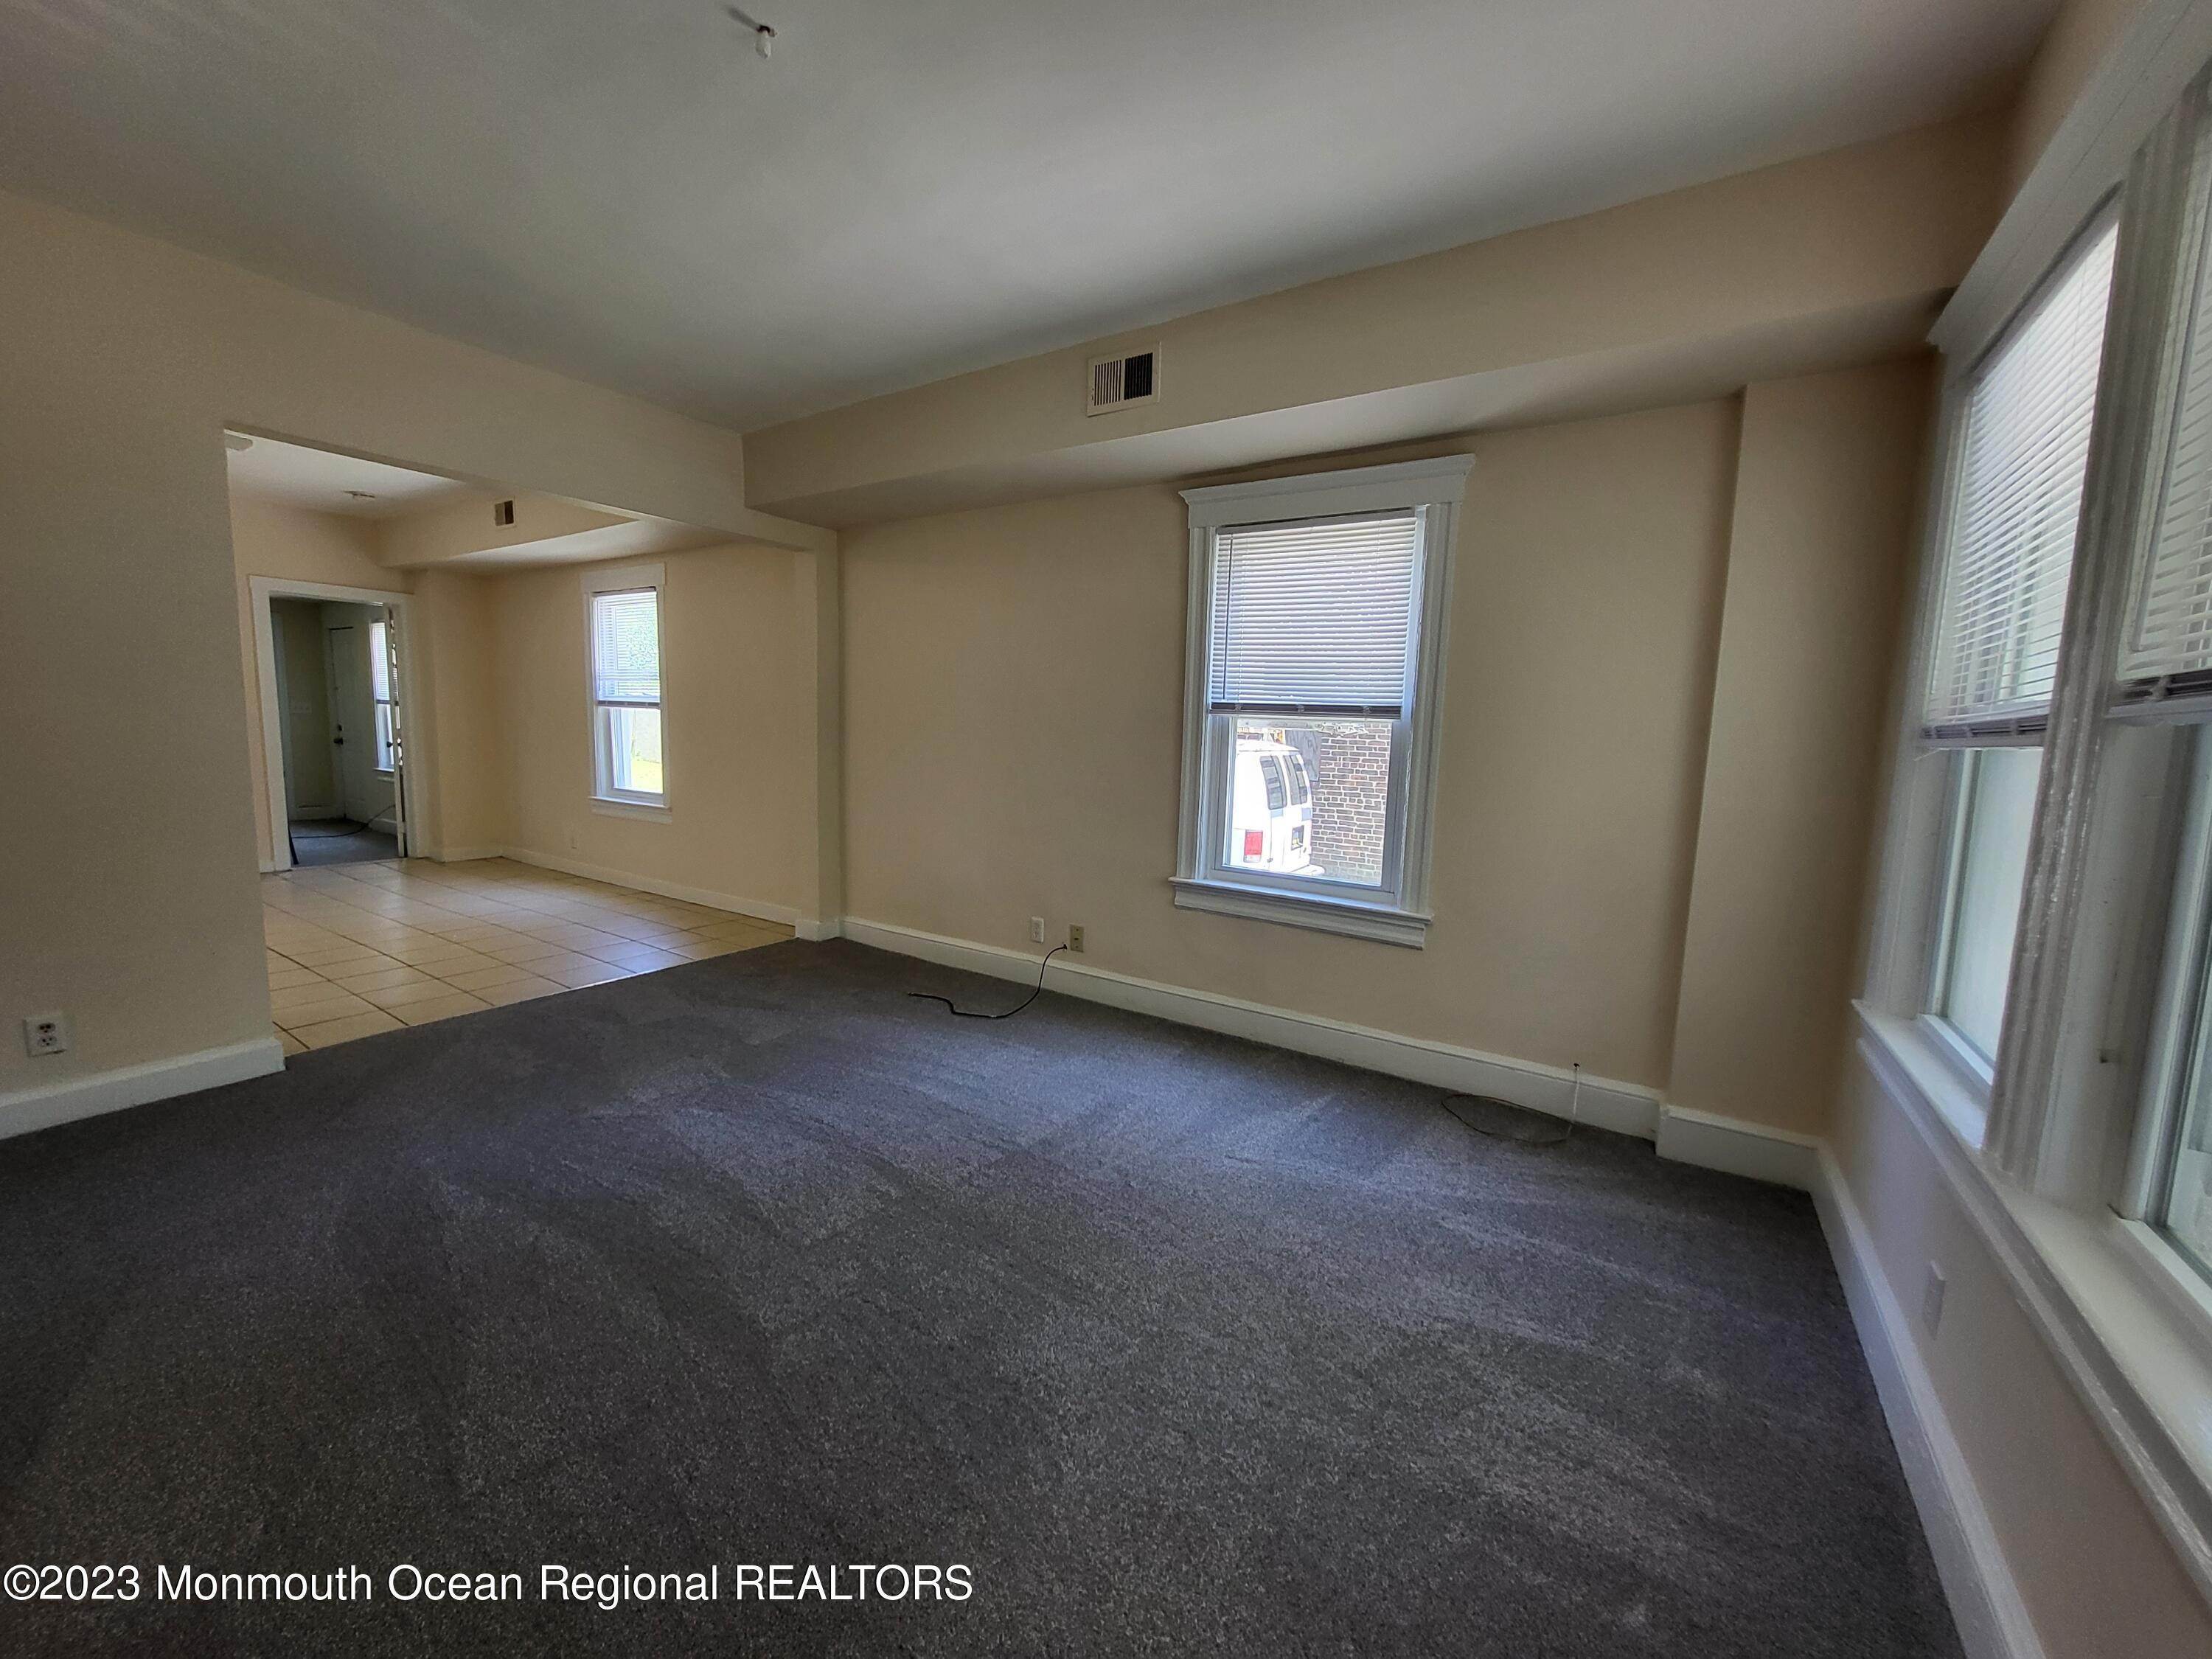 3. Residential Lease at 1413 Mattison Avenue Asbury Park, New Jersey 07712 United States